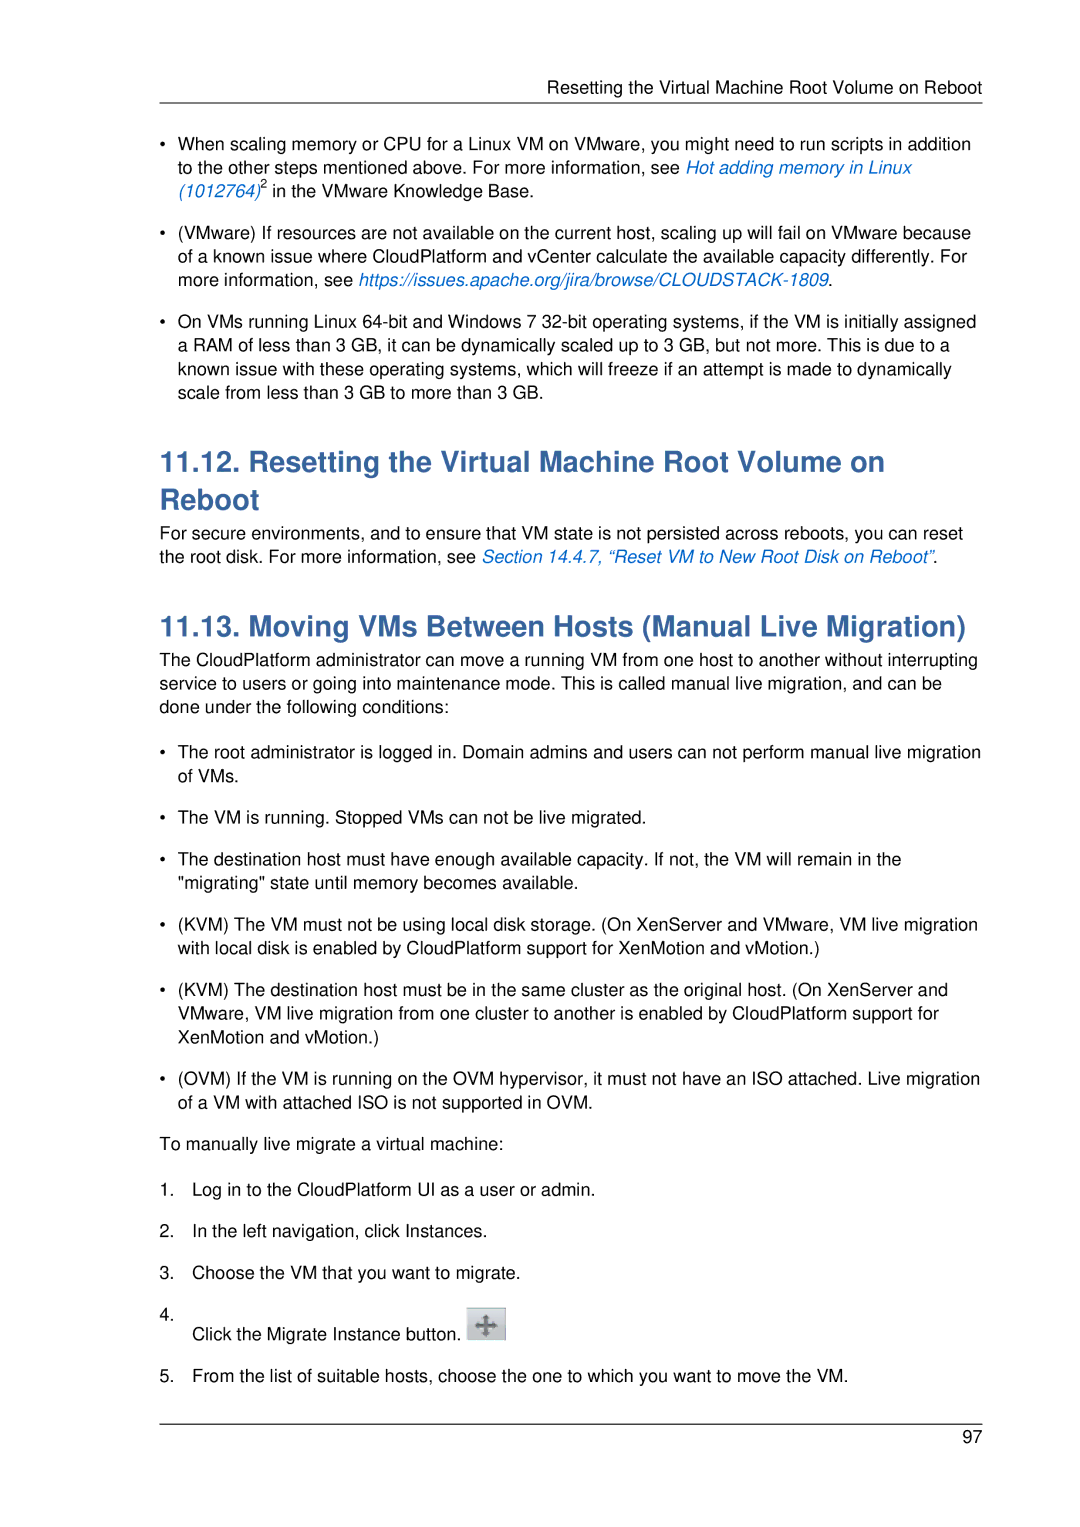 Citrix Systems 4.2 Resetting the Virtual Machine Root Volume on Reboot, Moving VMs Between Hosts Manual Live Migration 